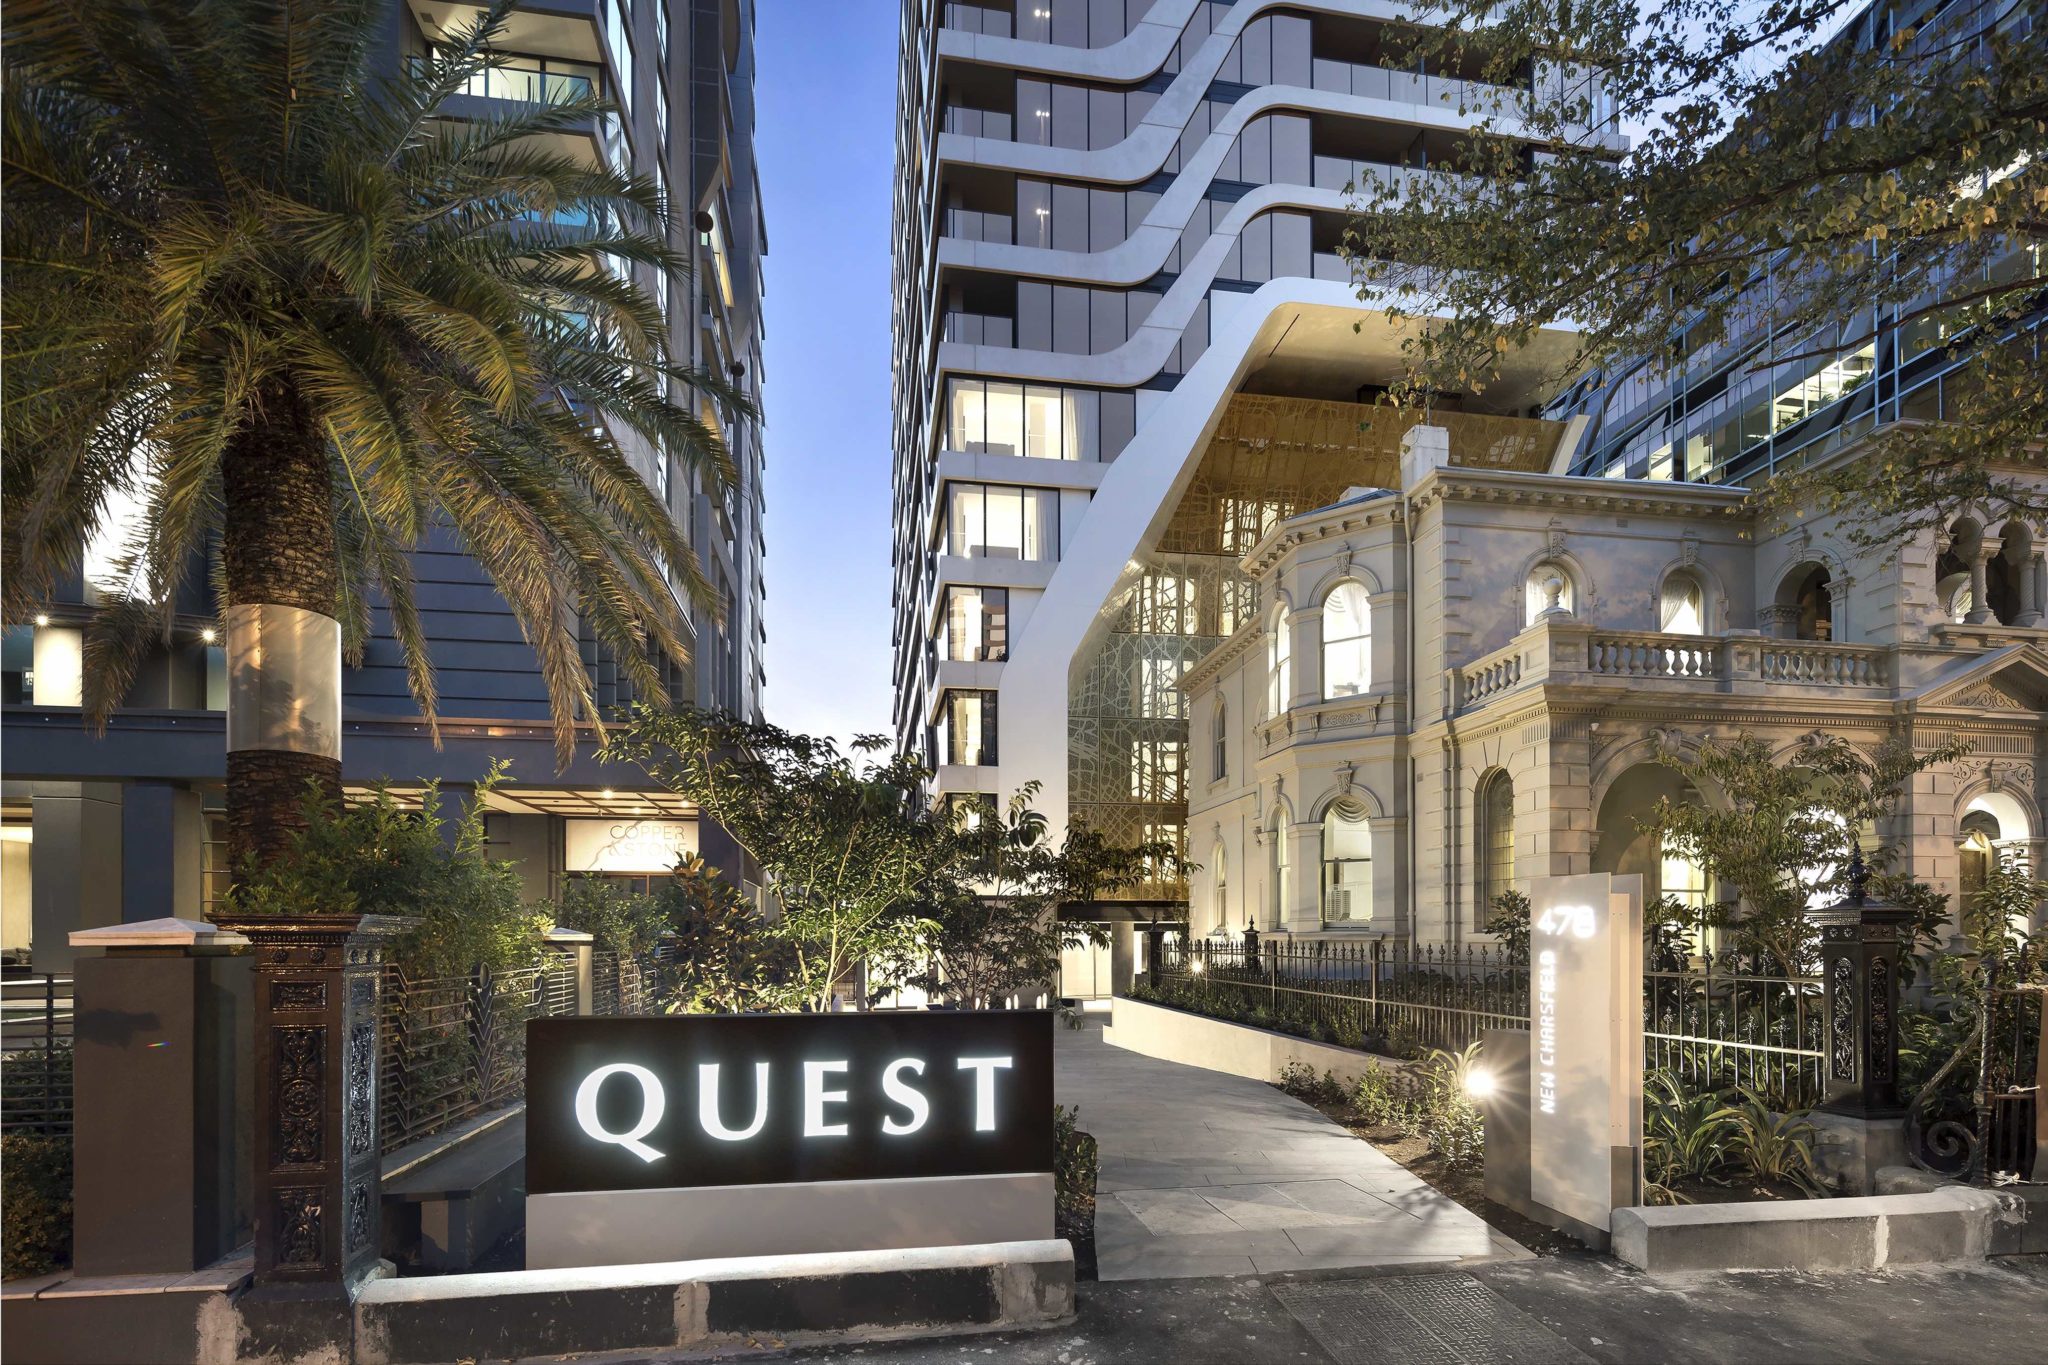 Quest Apartments appoints The Core Agency for creative account